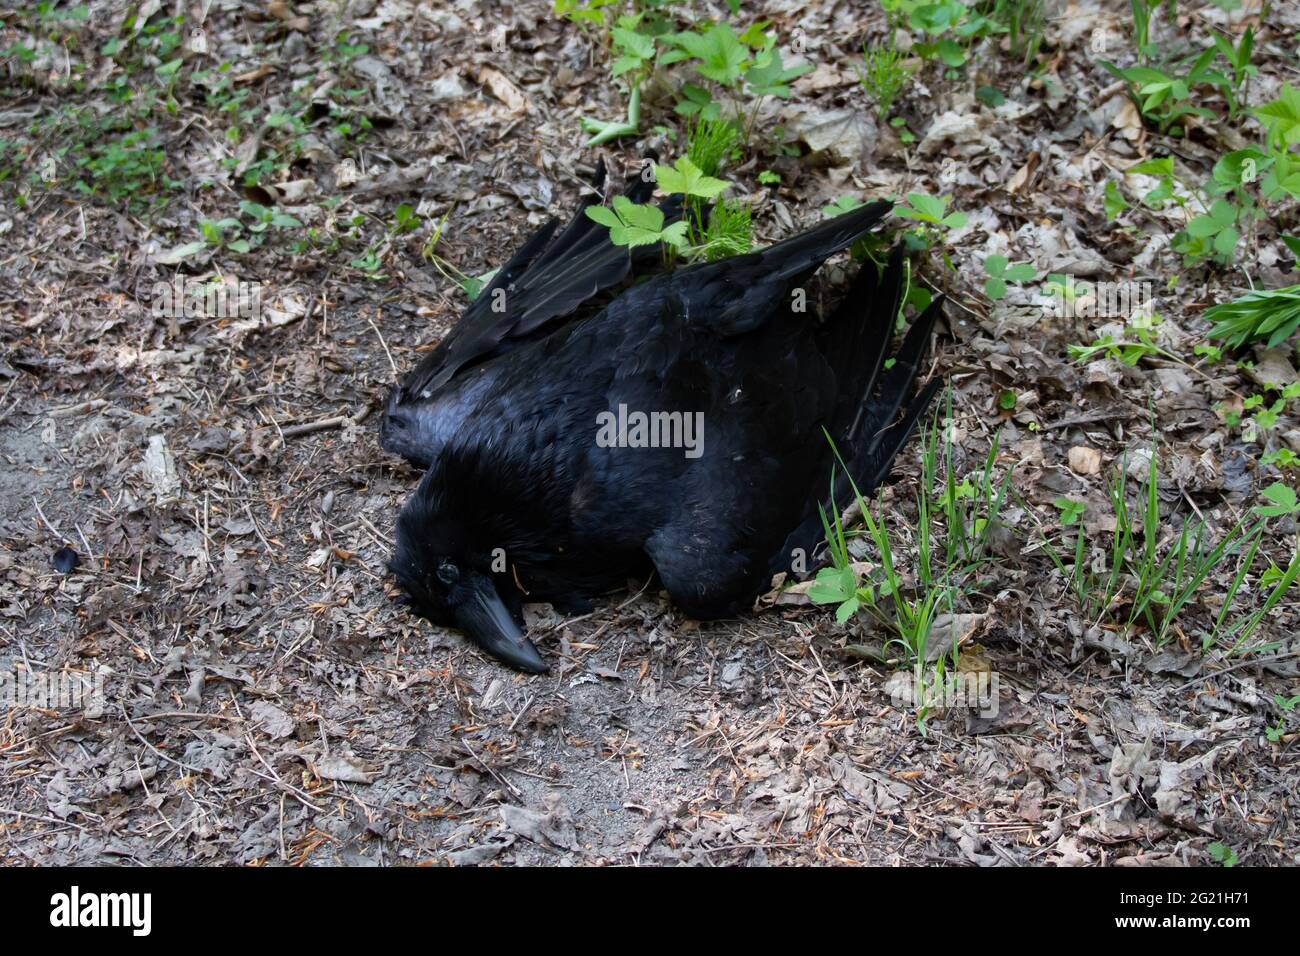 A dead common raven, Corvus corax, lying on the forest floor in the Adirondack Mountains, NY USA Stock Photo